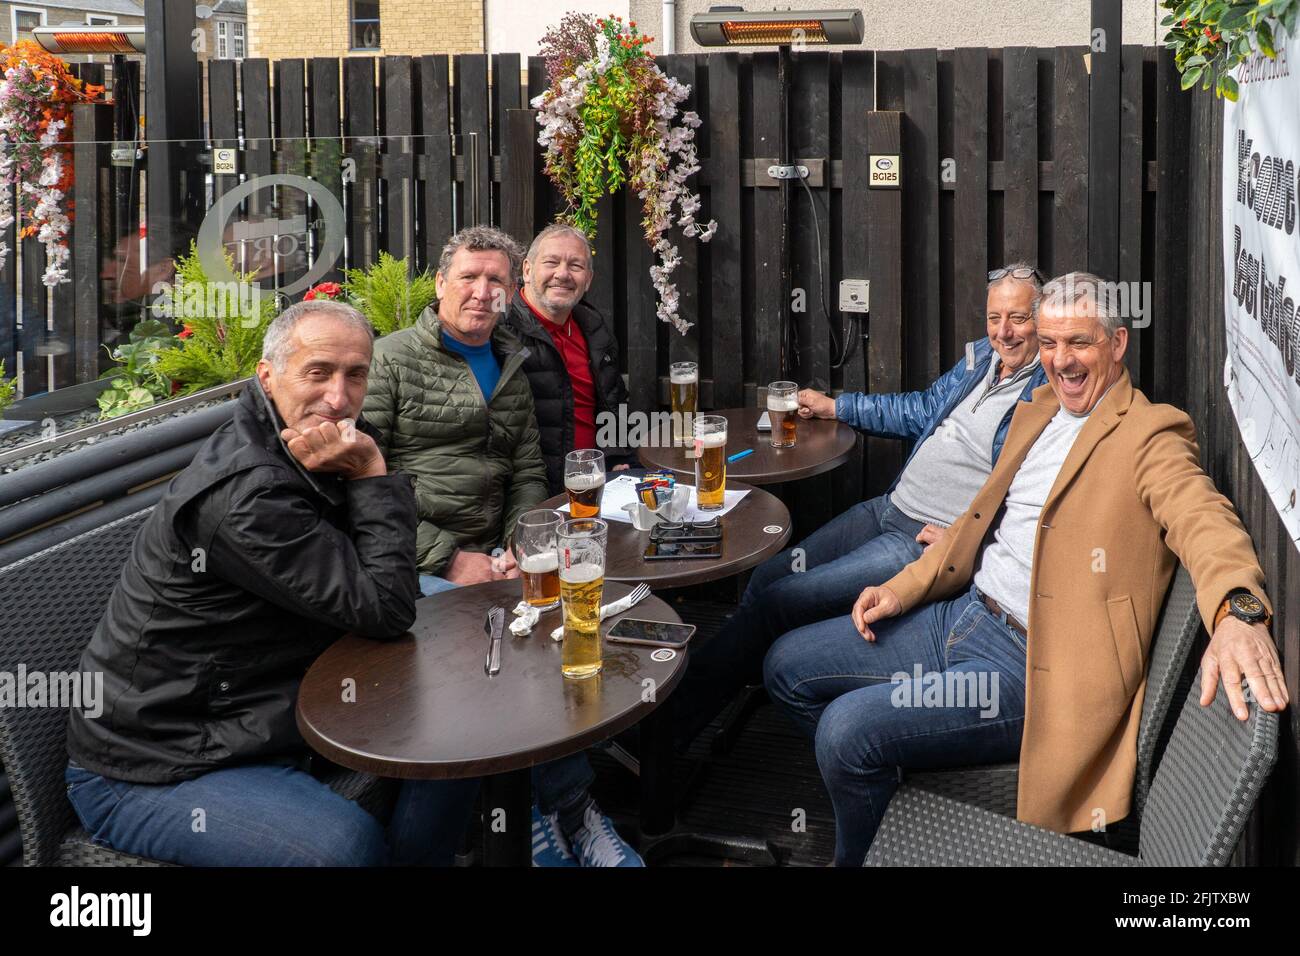 Broughty Ferry, Tayside, Dundee, Scotland, 26th of Apr 2021: Punters enjoying a drink, at their local (The Fort) in Broughty Ferry, after the scottish government relaxed lockdown restrictions in Scotland, which allows pubs throughout the country to reopen until 10pm, as long as they have an outside beer garden. Hospitality has been closed during this second lockdown in scotland. Credit: Barry Nixon Stable Air Media/Alamy Live News Stock Photo